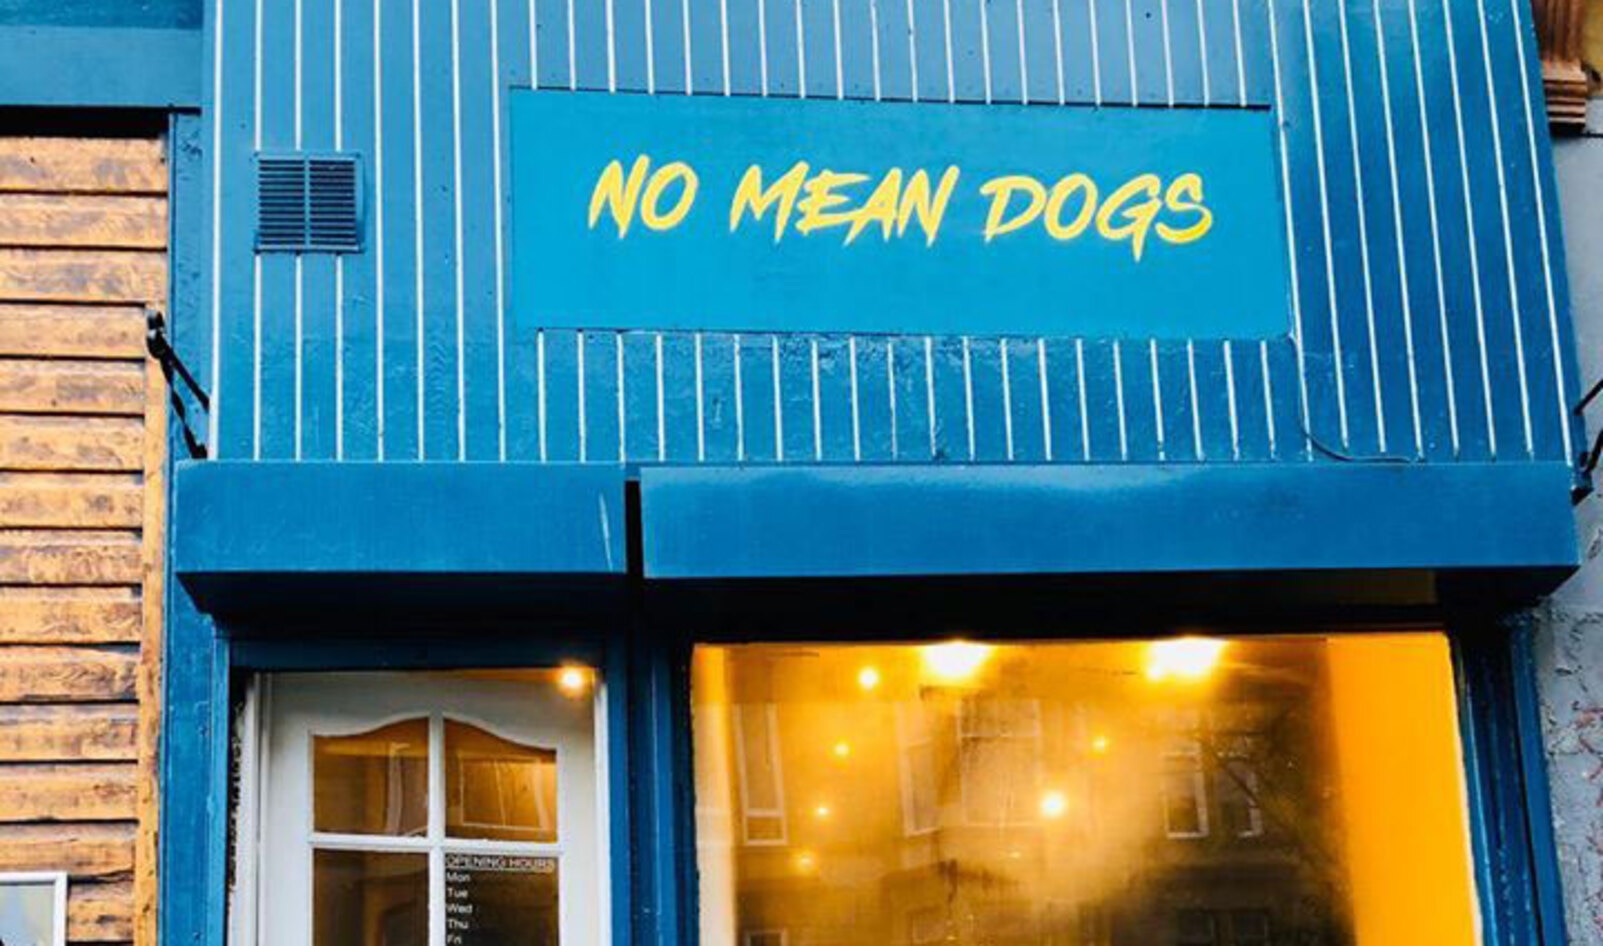 Glasgow’s New Shop “No Mean Dogs” Sells Out of Vegan Hot Dogs in Five Hours